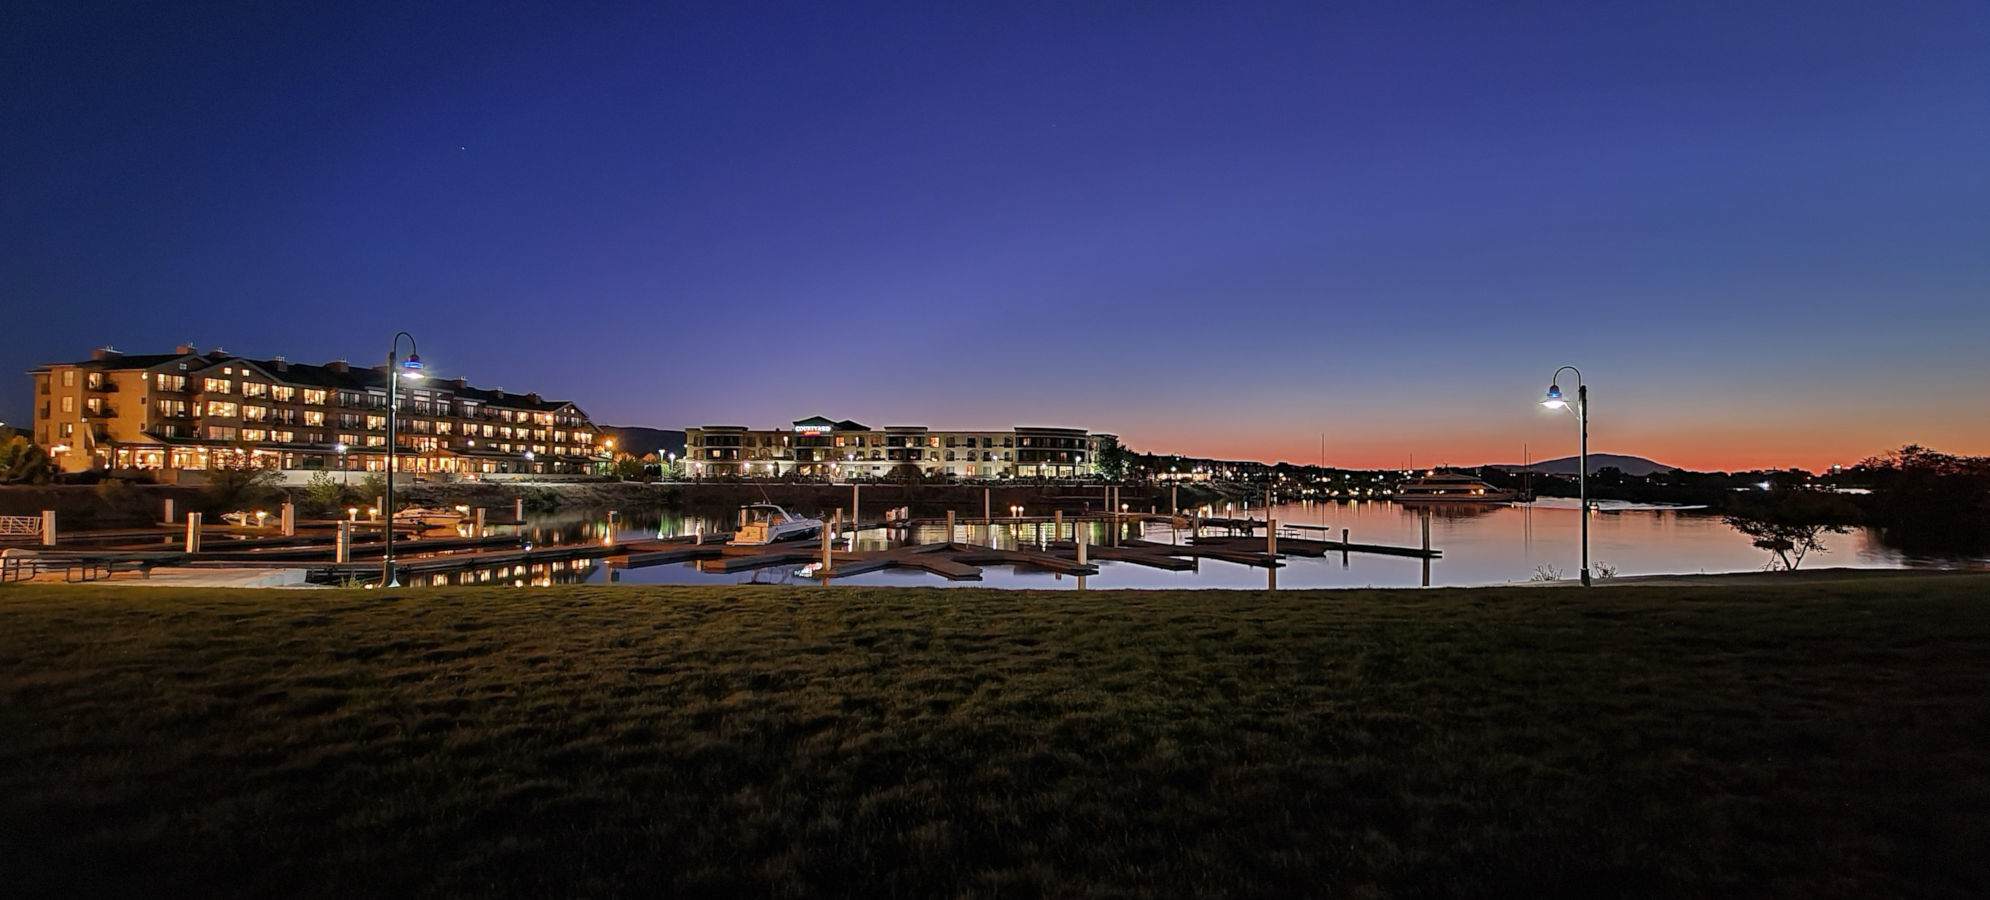 Is Richland Washington a Nice Place to Live?  Richland Washington is a Nice Place to Live. Richland Washington is a wonderful place to call home. Boasting stunning scenery, plenty of outdoor activities and a close-knit community, Richland has something for everyone.